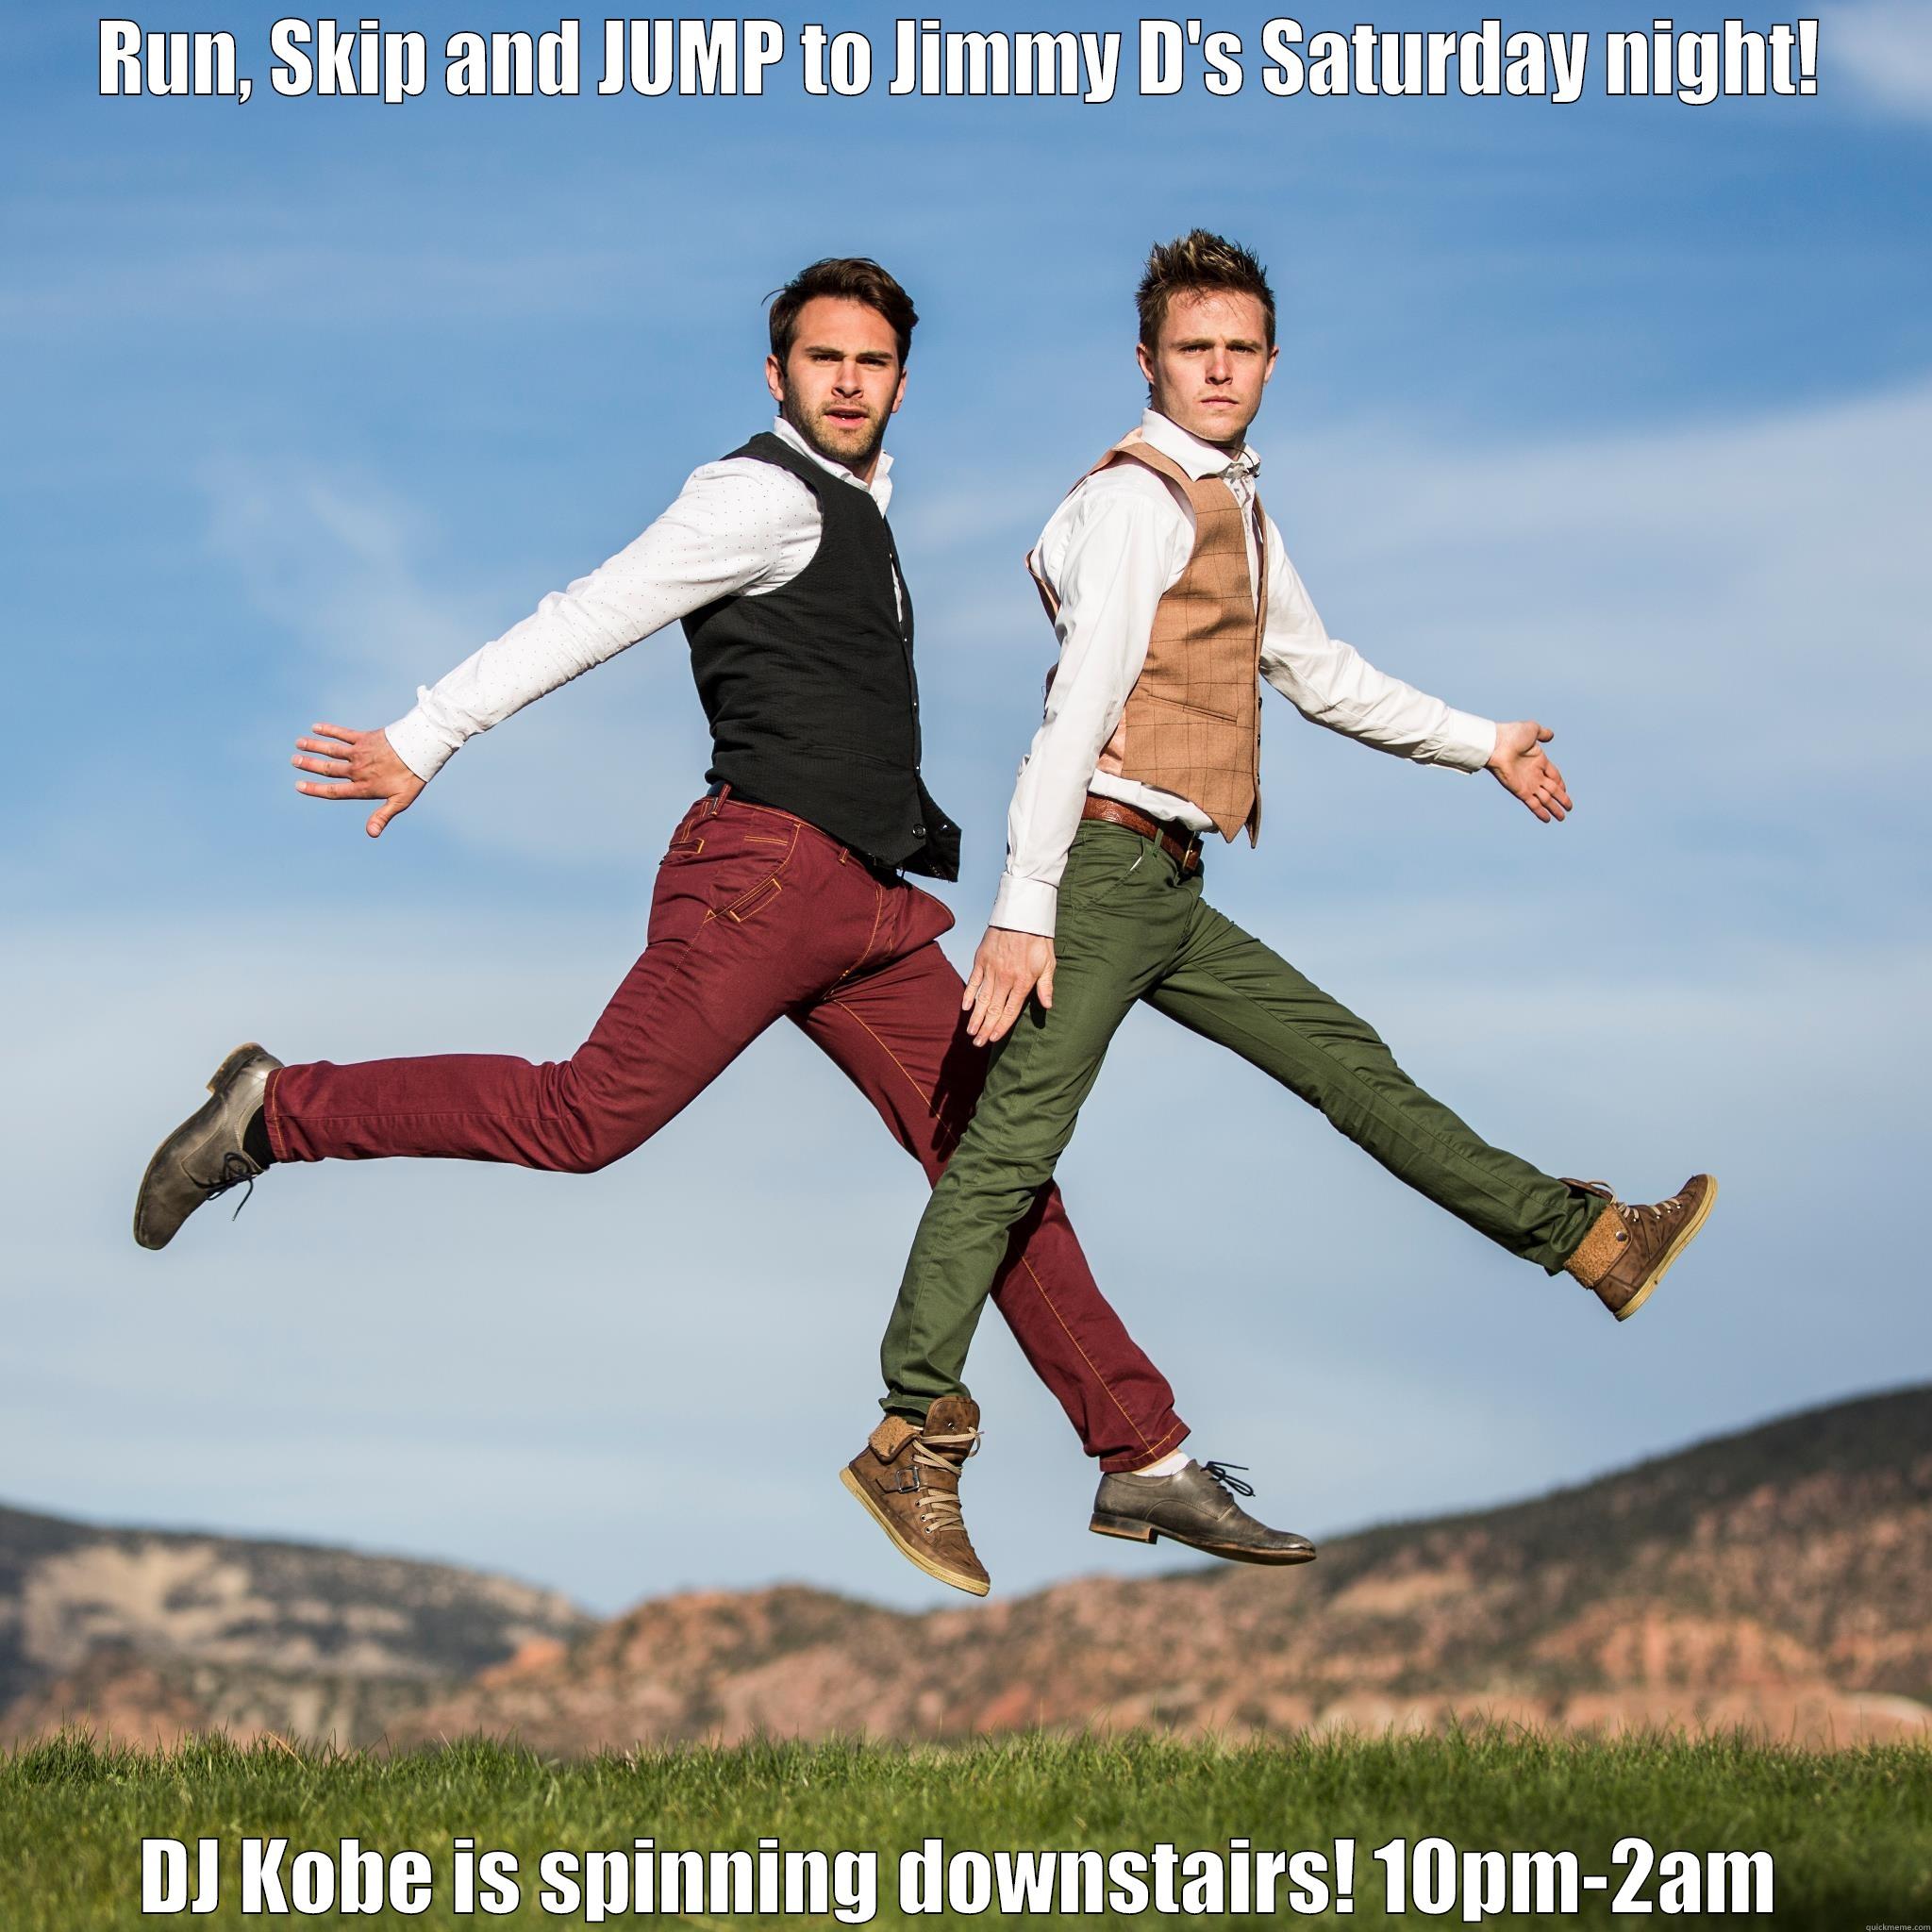 RUN, SKIP AND JUMP TO JIMMY D'S SATURDAY NIGHT! DJ KOBE IS SPINNING DOWNSTAIRS! 10PM-2AM Misc